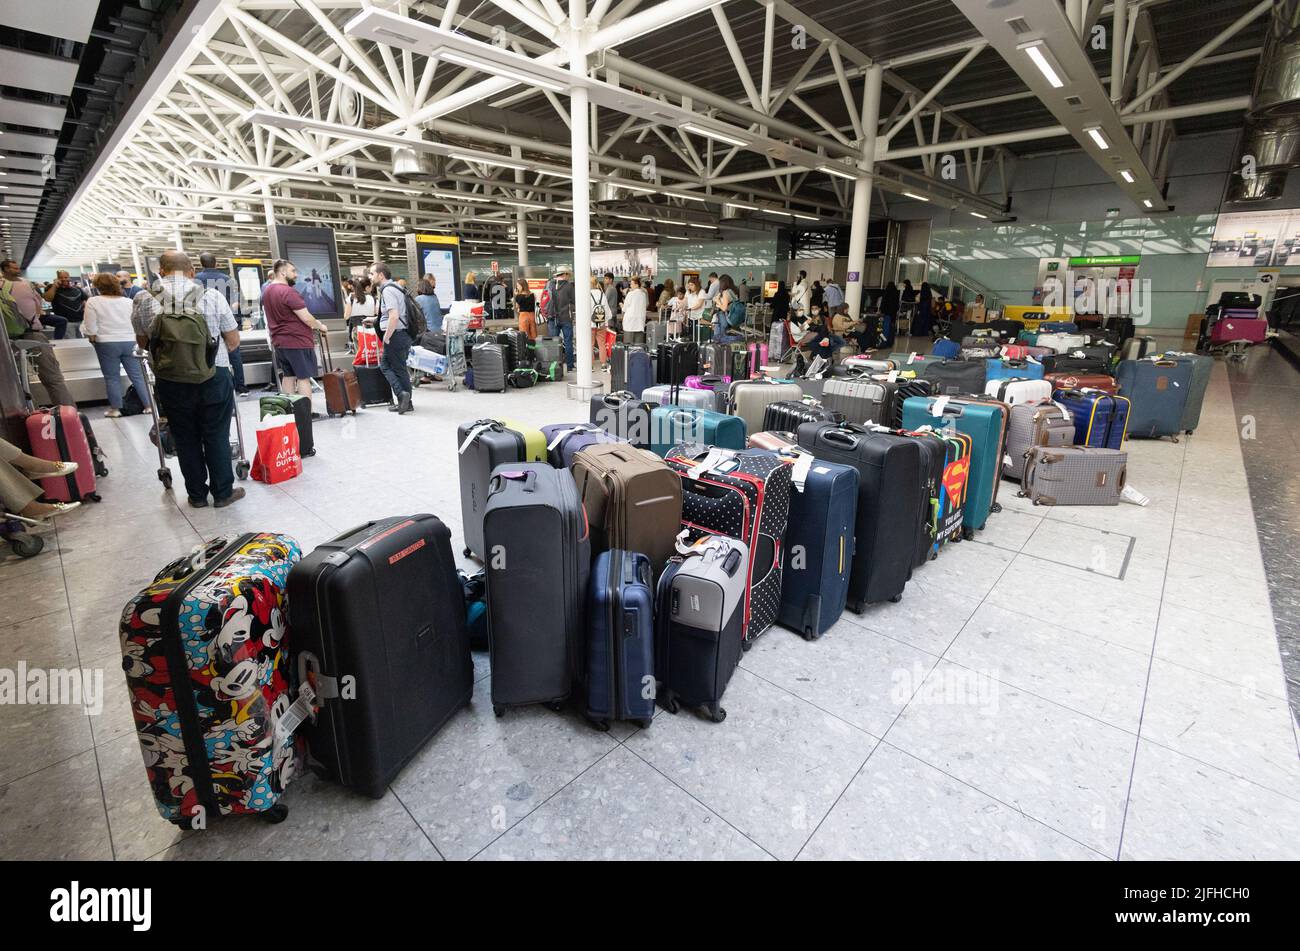 Heathrow airport travel disruption; Piles of baggage waiting uncollected in baggage collection, Terminal 3 interior delay, London airport UK; Stock Photo